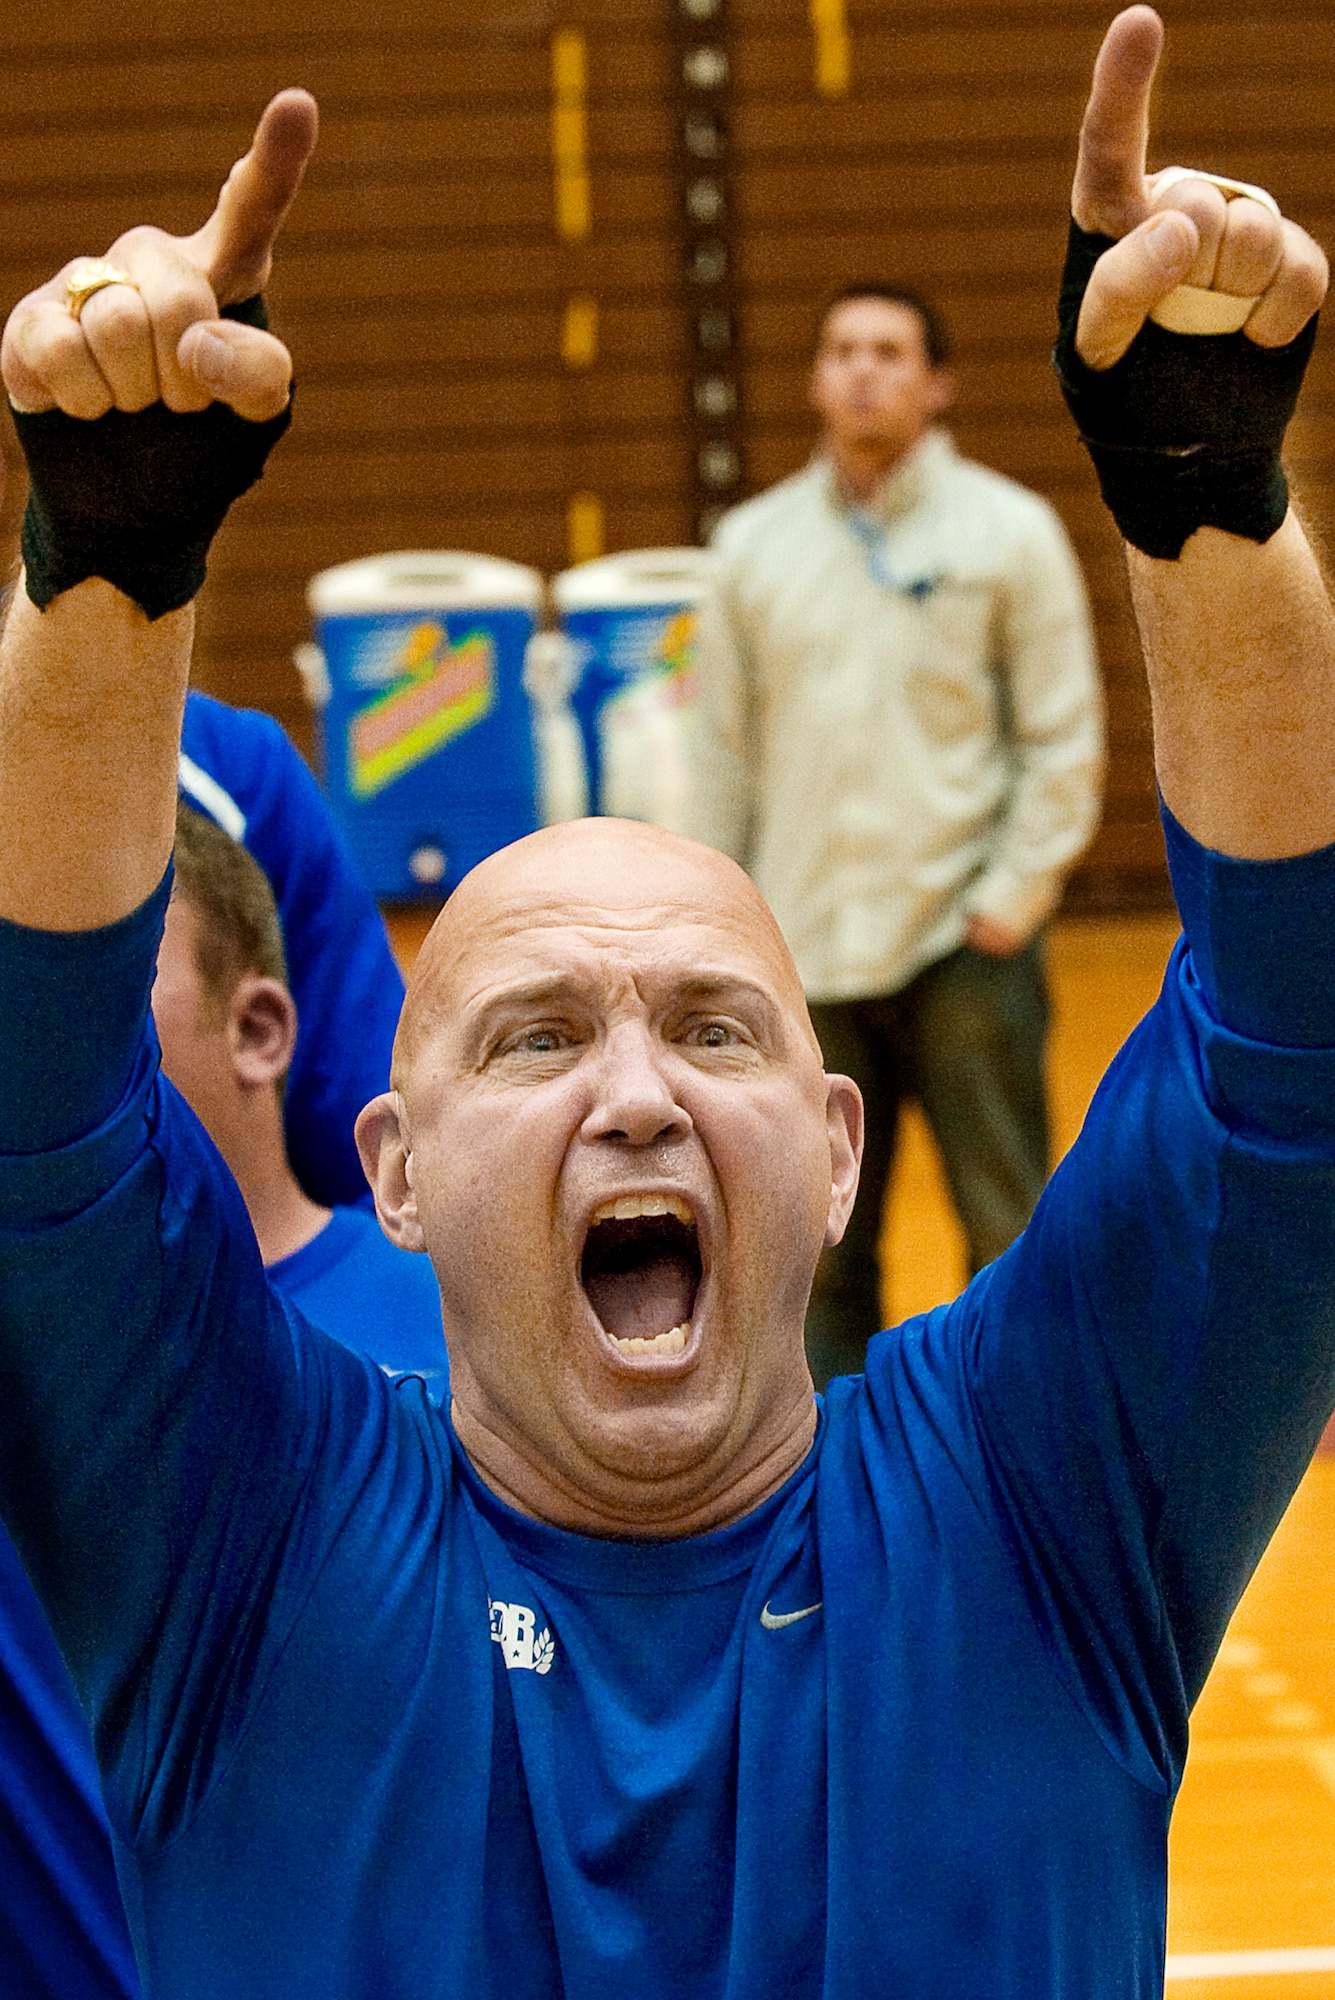 Chief Orslene celebrates after Air Force’s wheelchair basketball victory against Navy May 12 that clinched the bronze medal at the inaugural Warrior Games in Colorado Springs.  (U.S. Air Force photo)